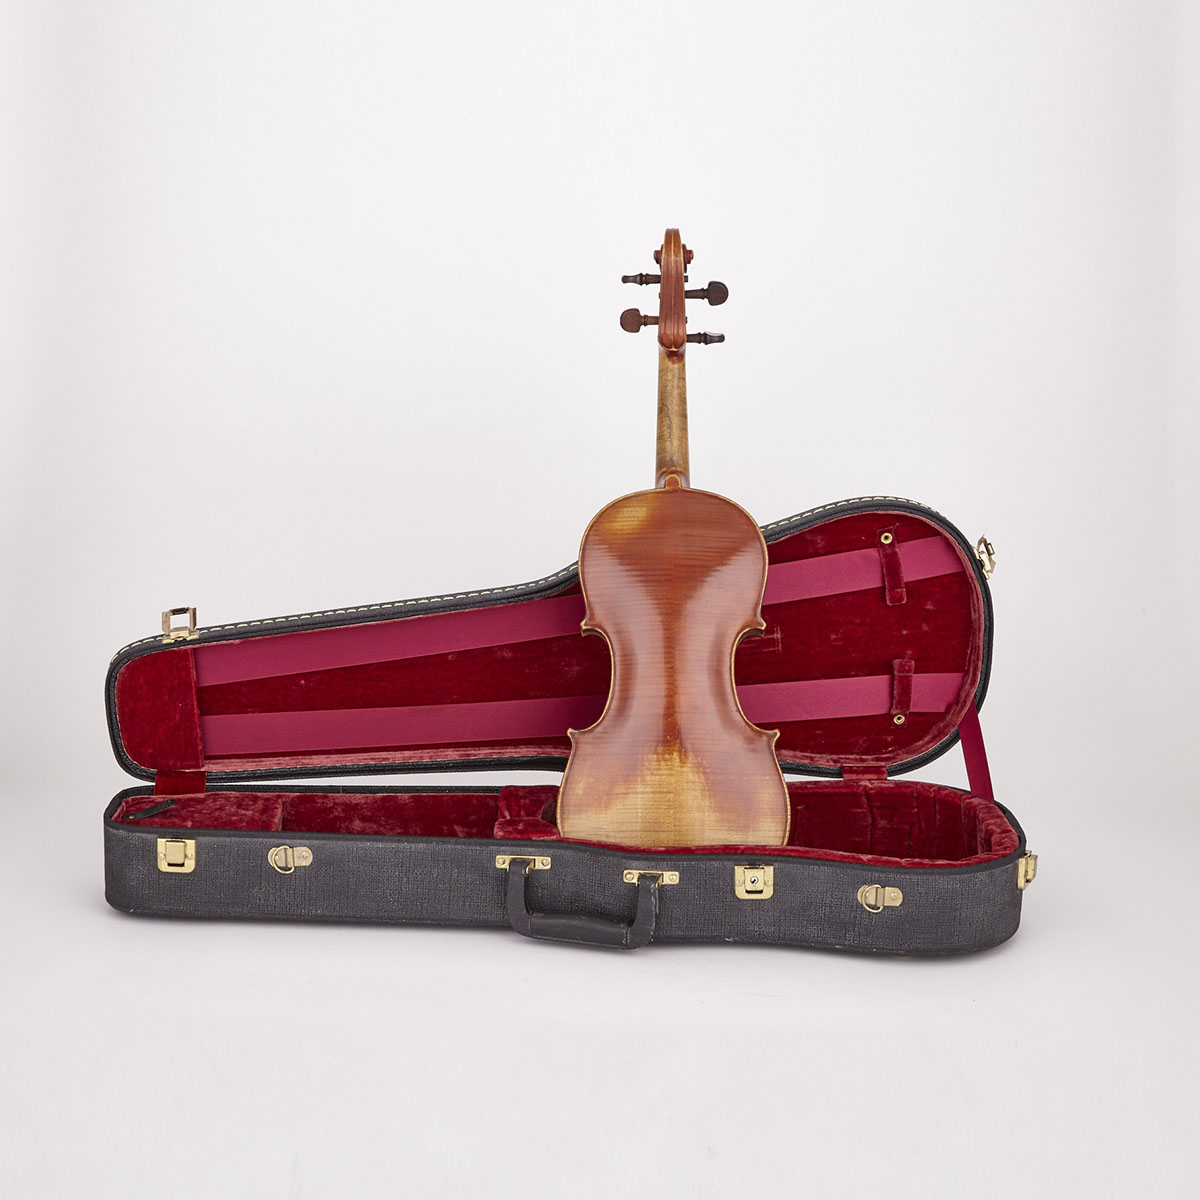 Continental 7/8 Violin Labelled ‘Joseph Guarnerius, 1752’, early-mid 20th century